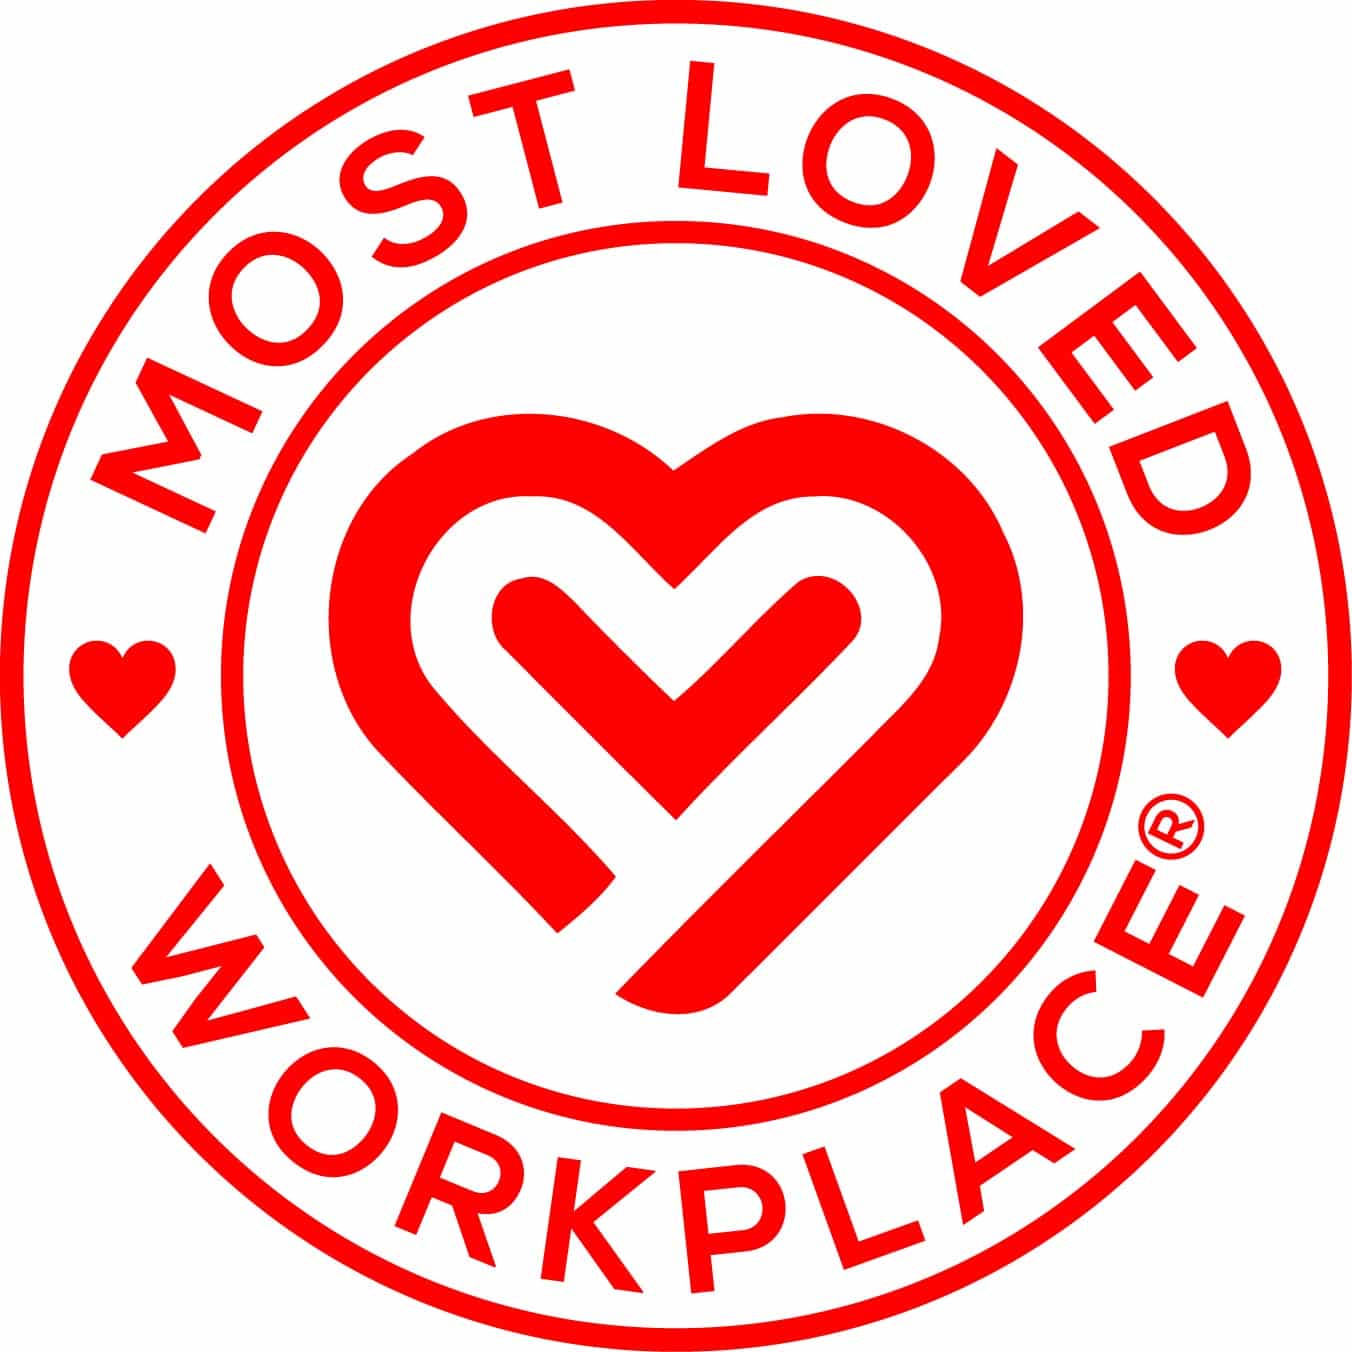 America's 100 Most Loved Workplaces 2022